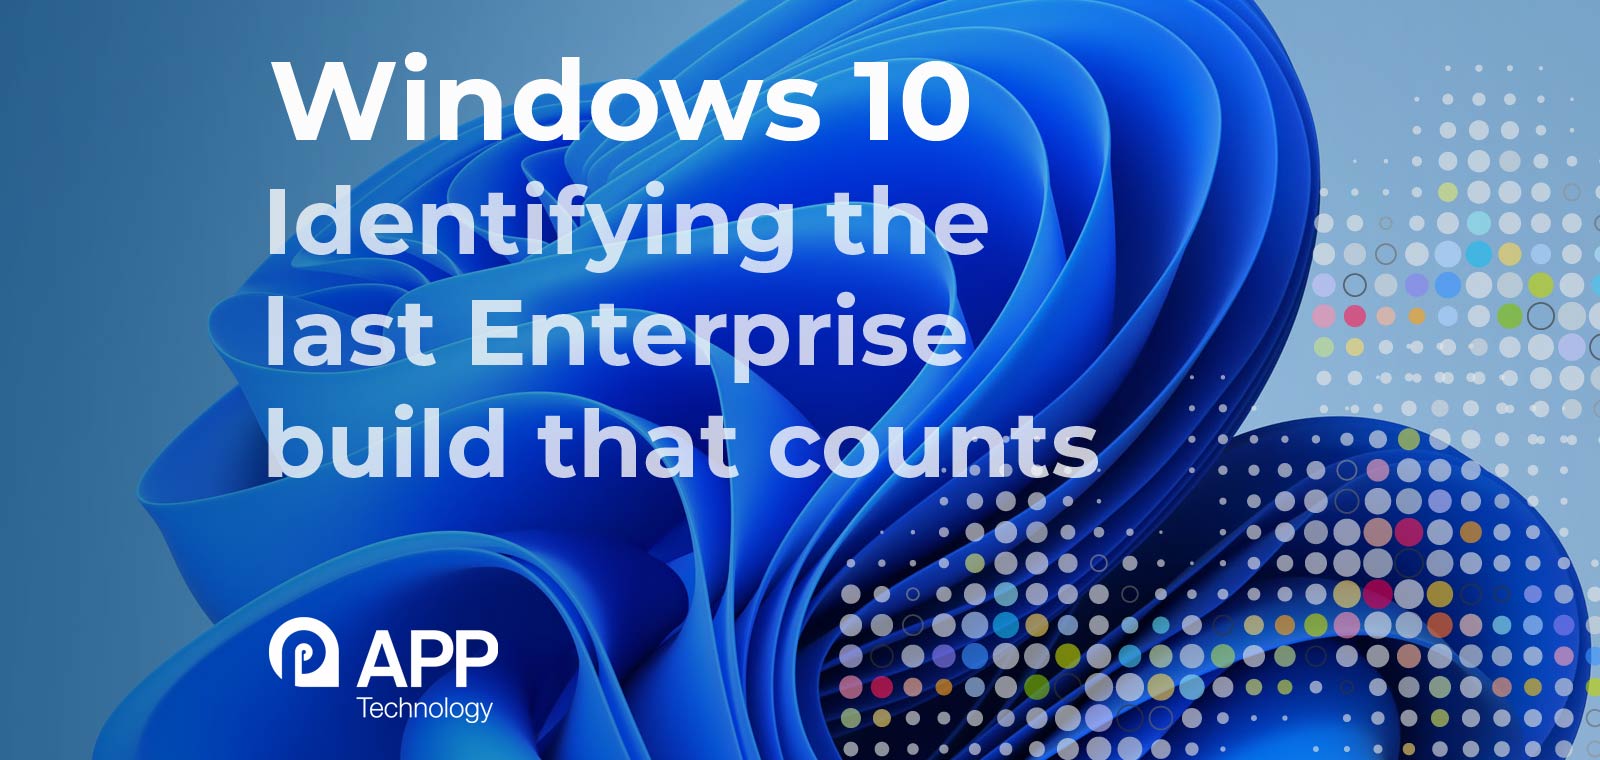 Windows 10 Identifying the last Enterprise build that counts with text